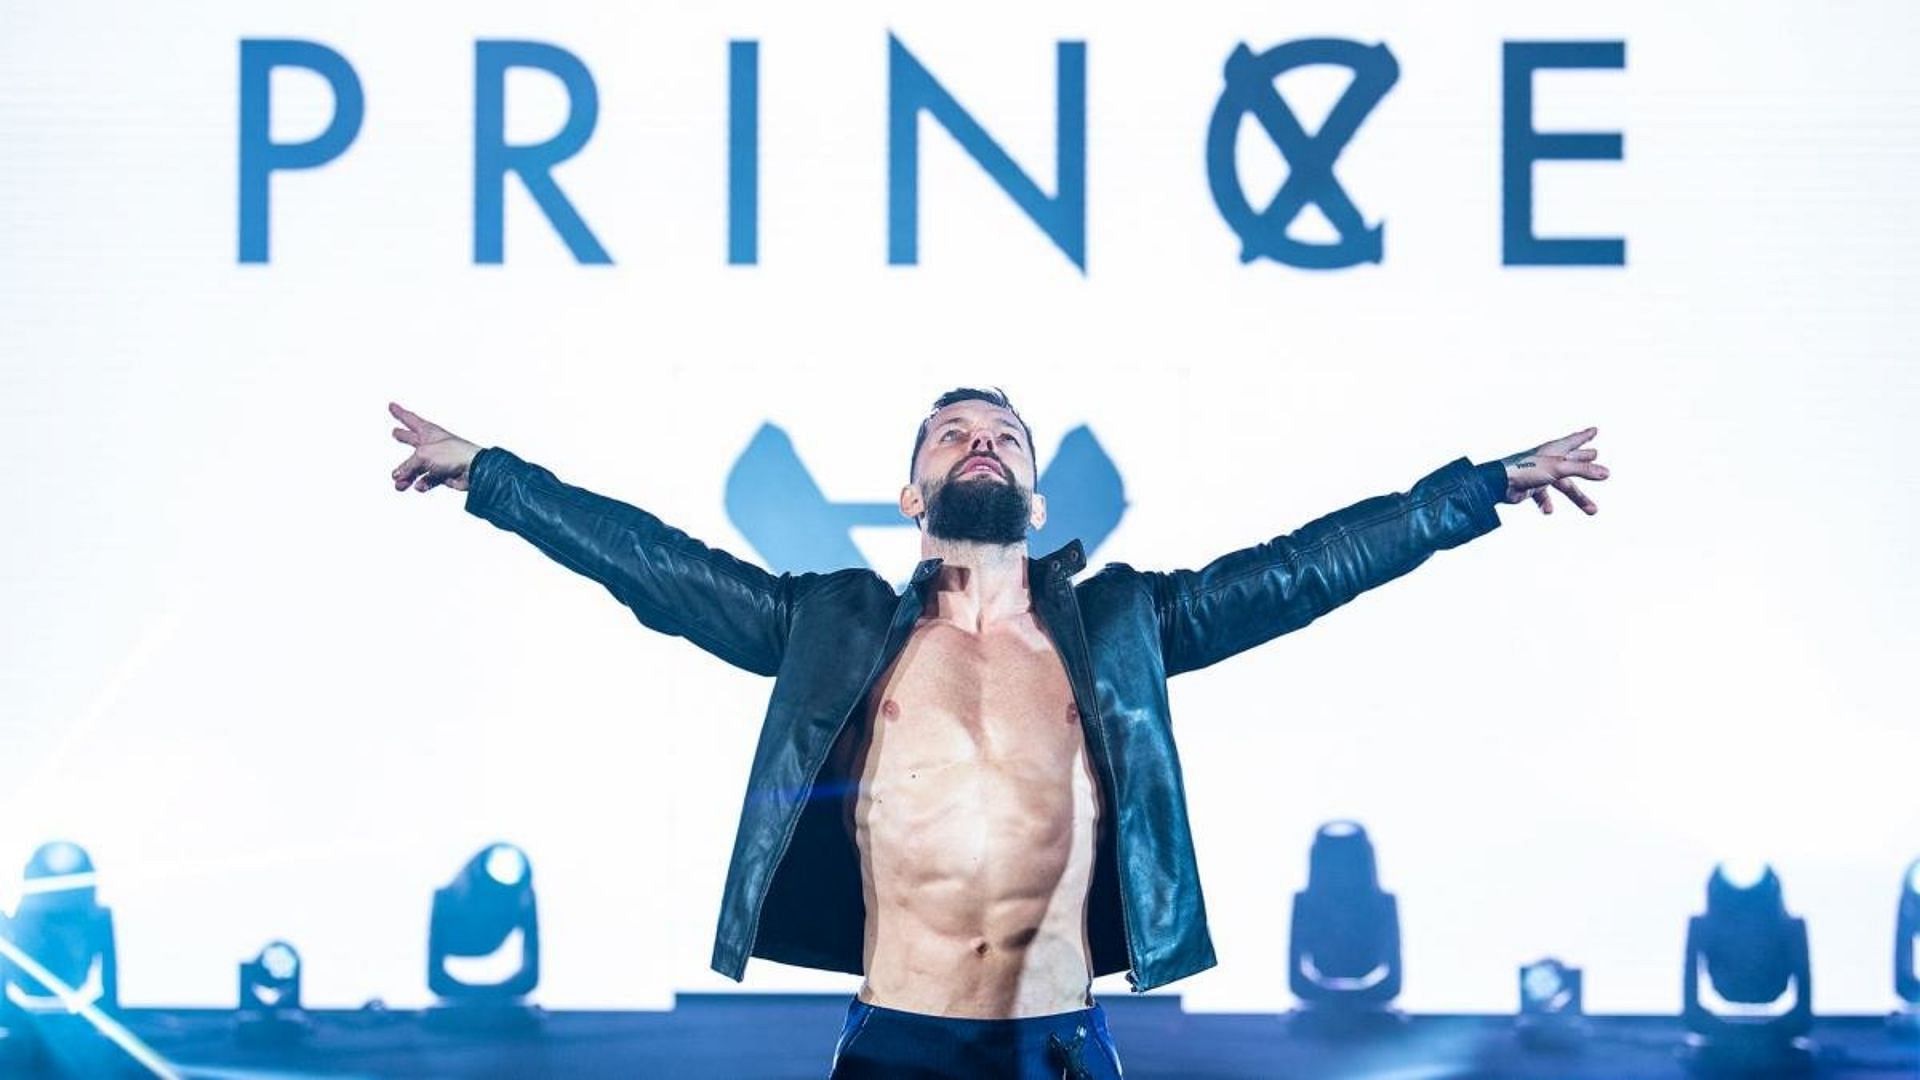 Finn Balor is the first-ever Universal Champion